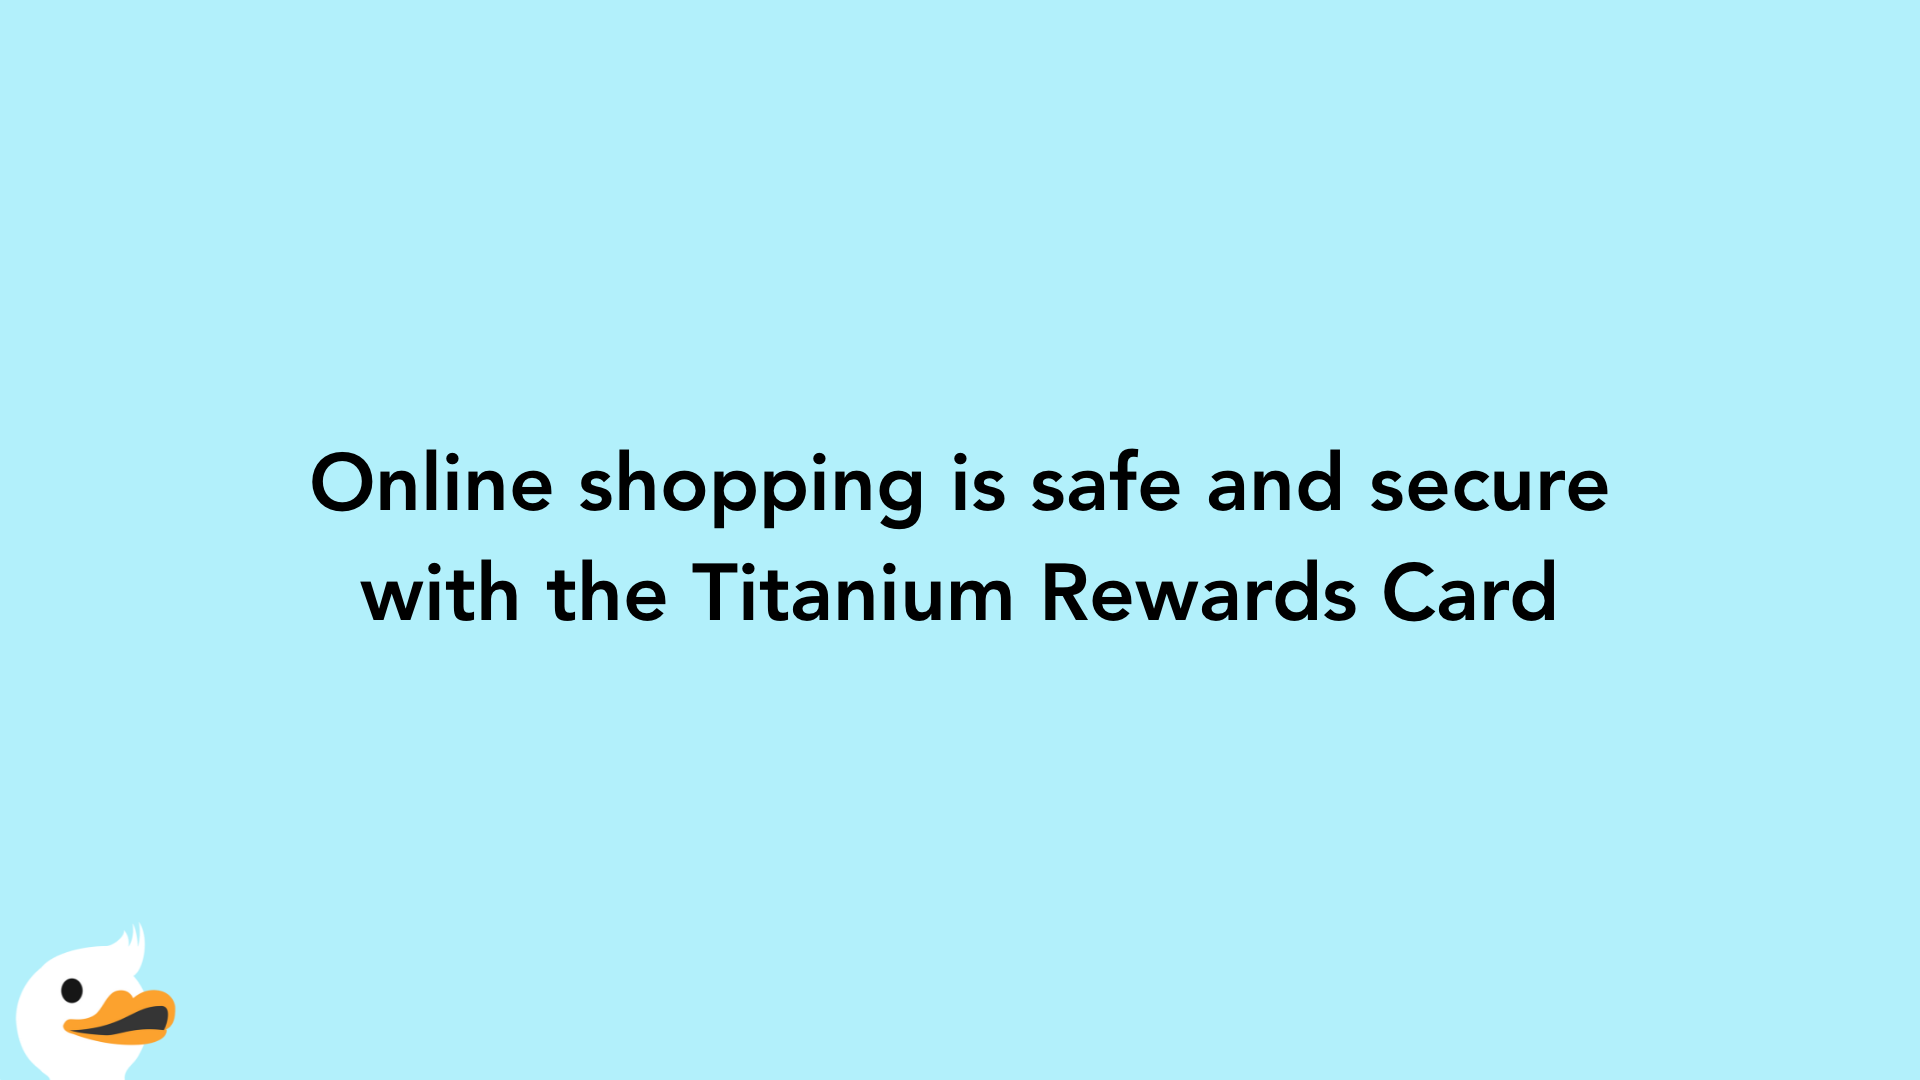 Online shopping is safe and secure with the Titanium Rewards Card